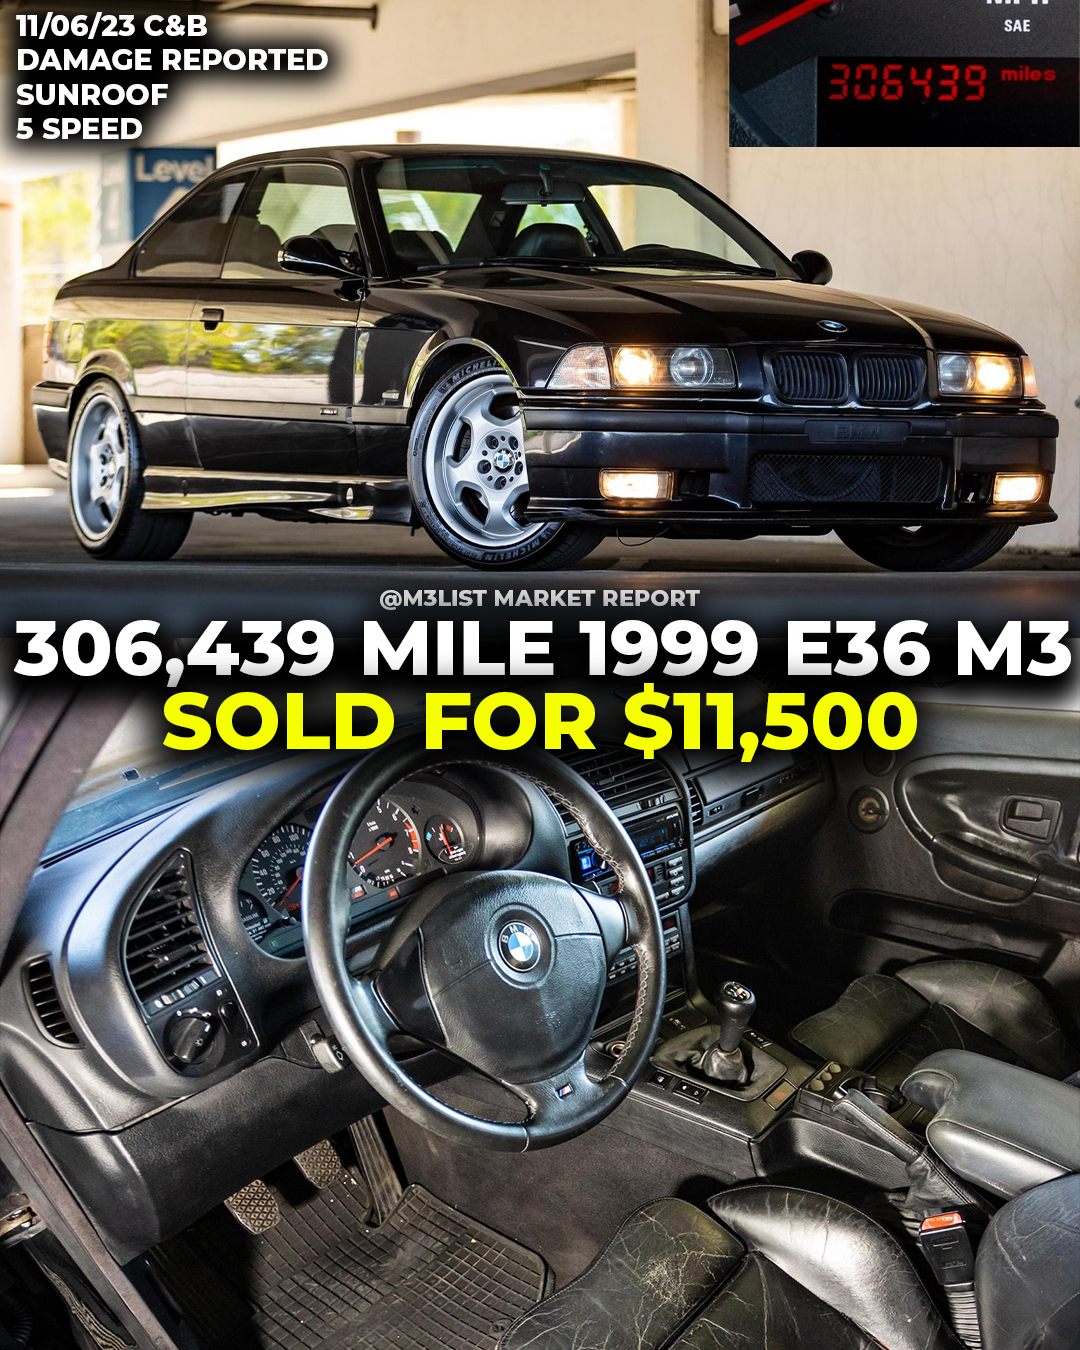 300k mile 1999 E36 M3 5 speed sold on Cars & Bids with an accident history!